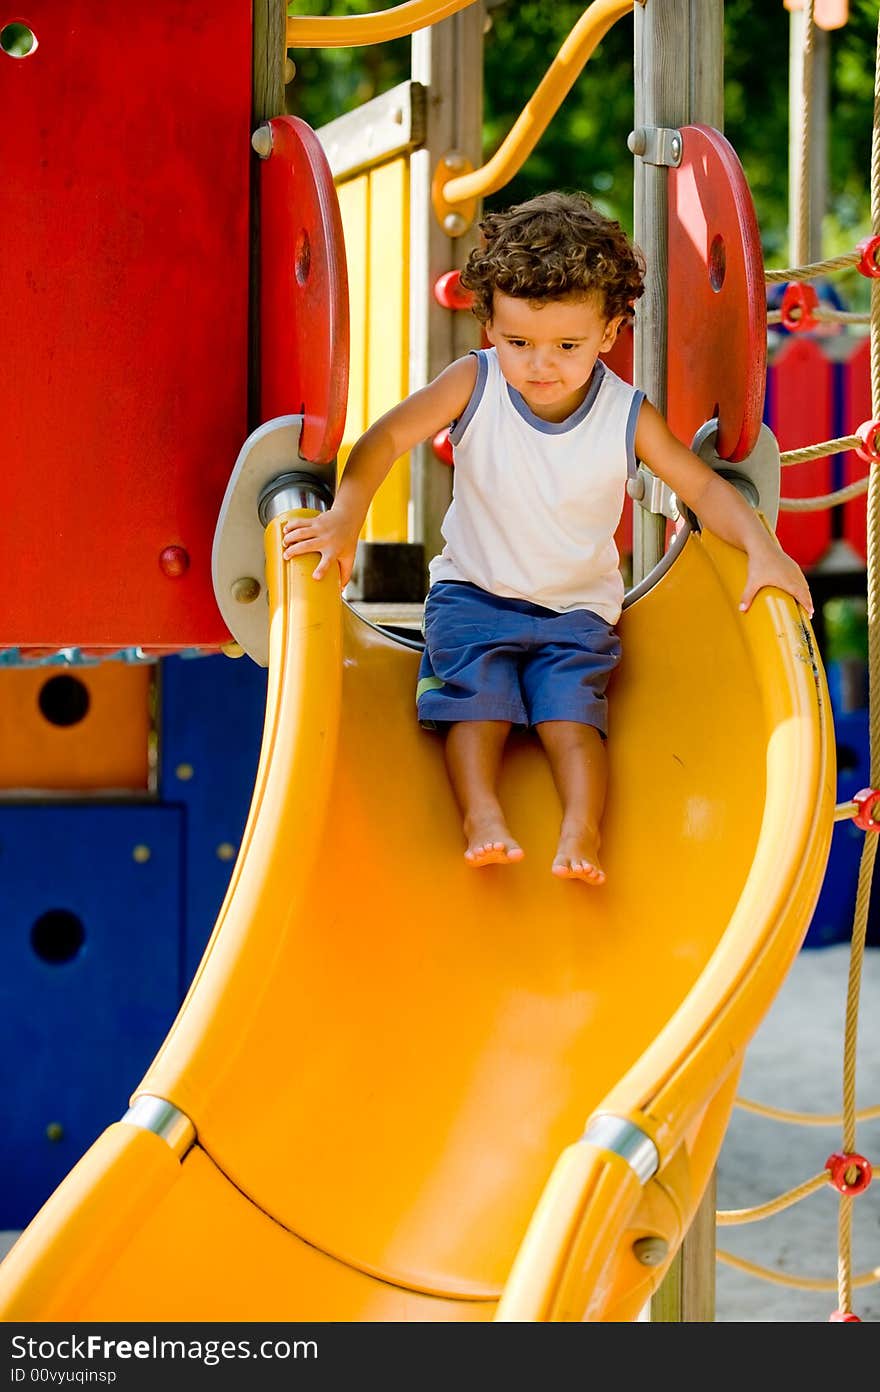 A cute young kid playing on a slide in a park. A cute young kid playing on a slide in a park